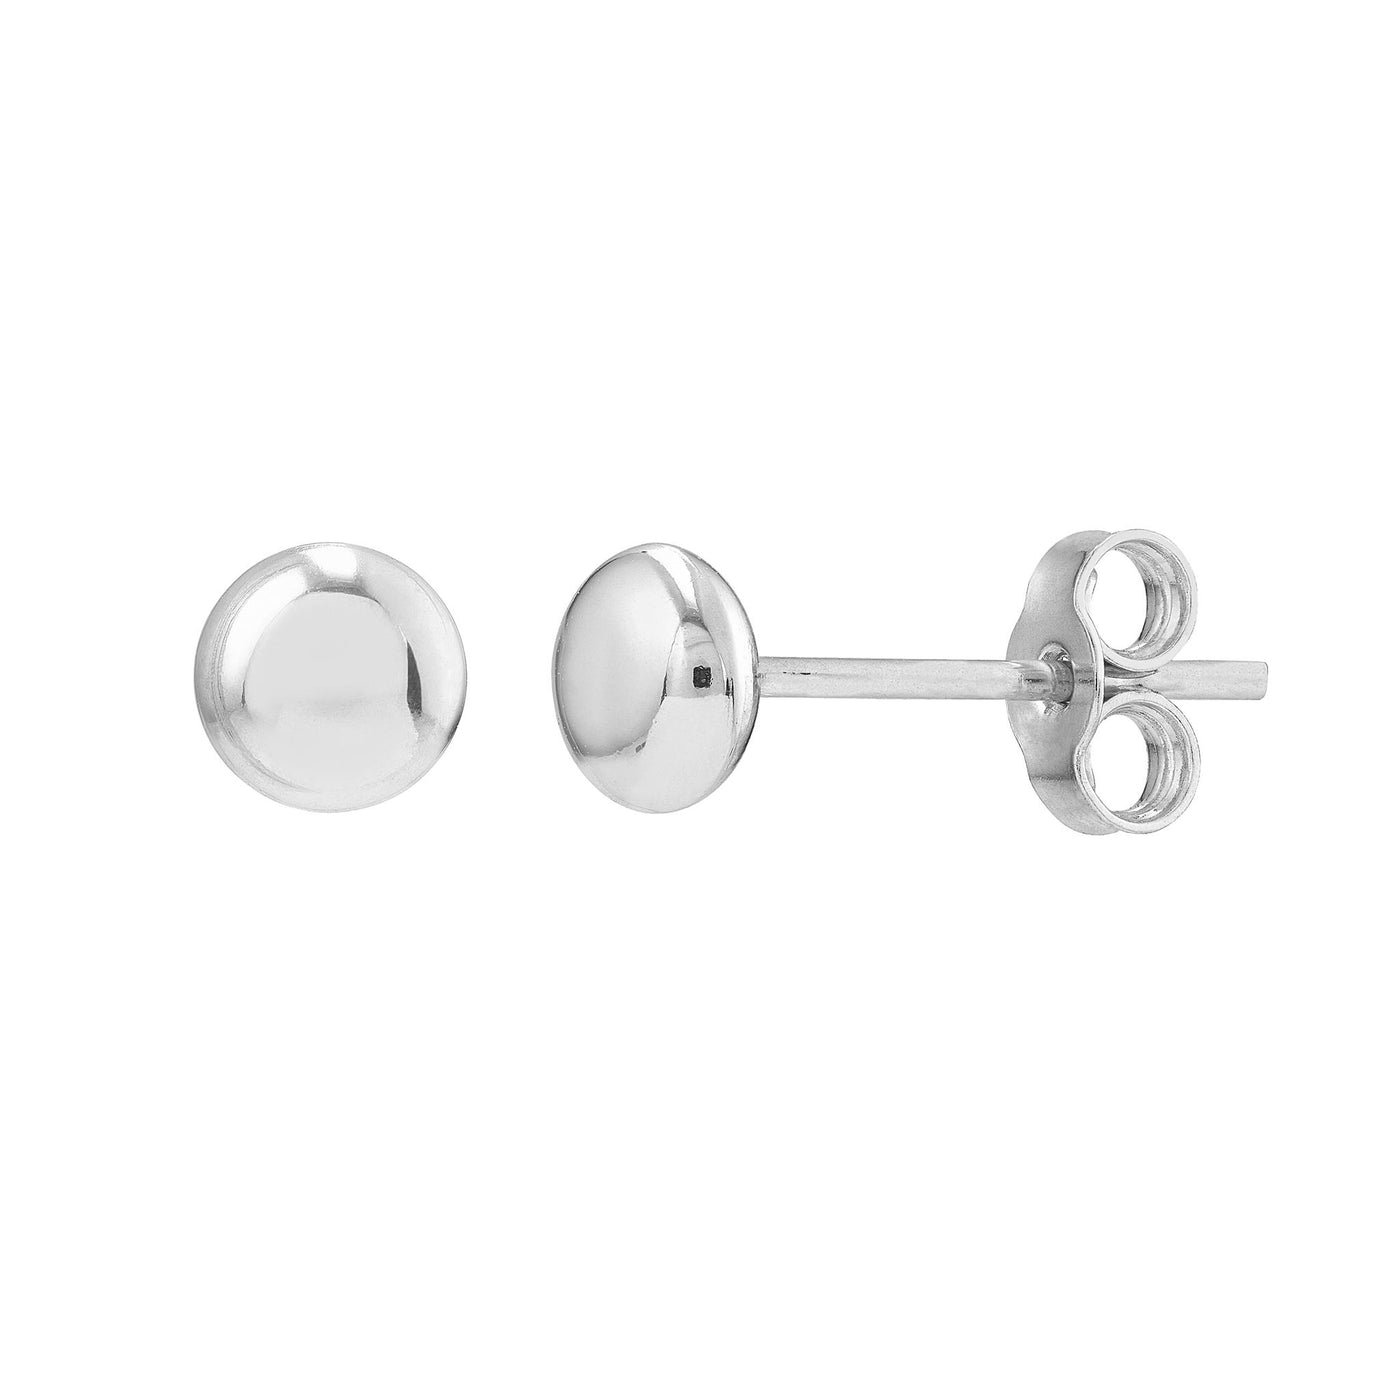 14K White Gold 4.5mm Circle Button Style Earrings